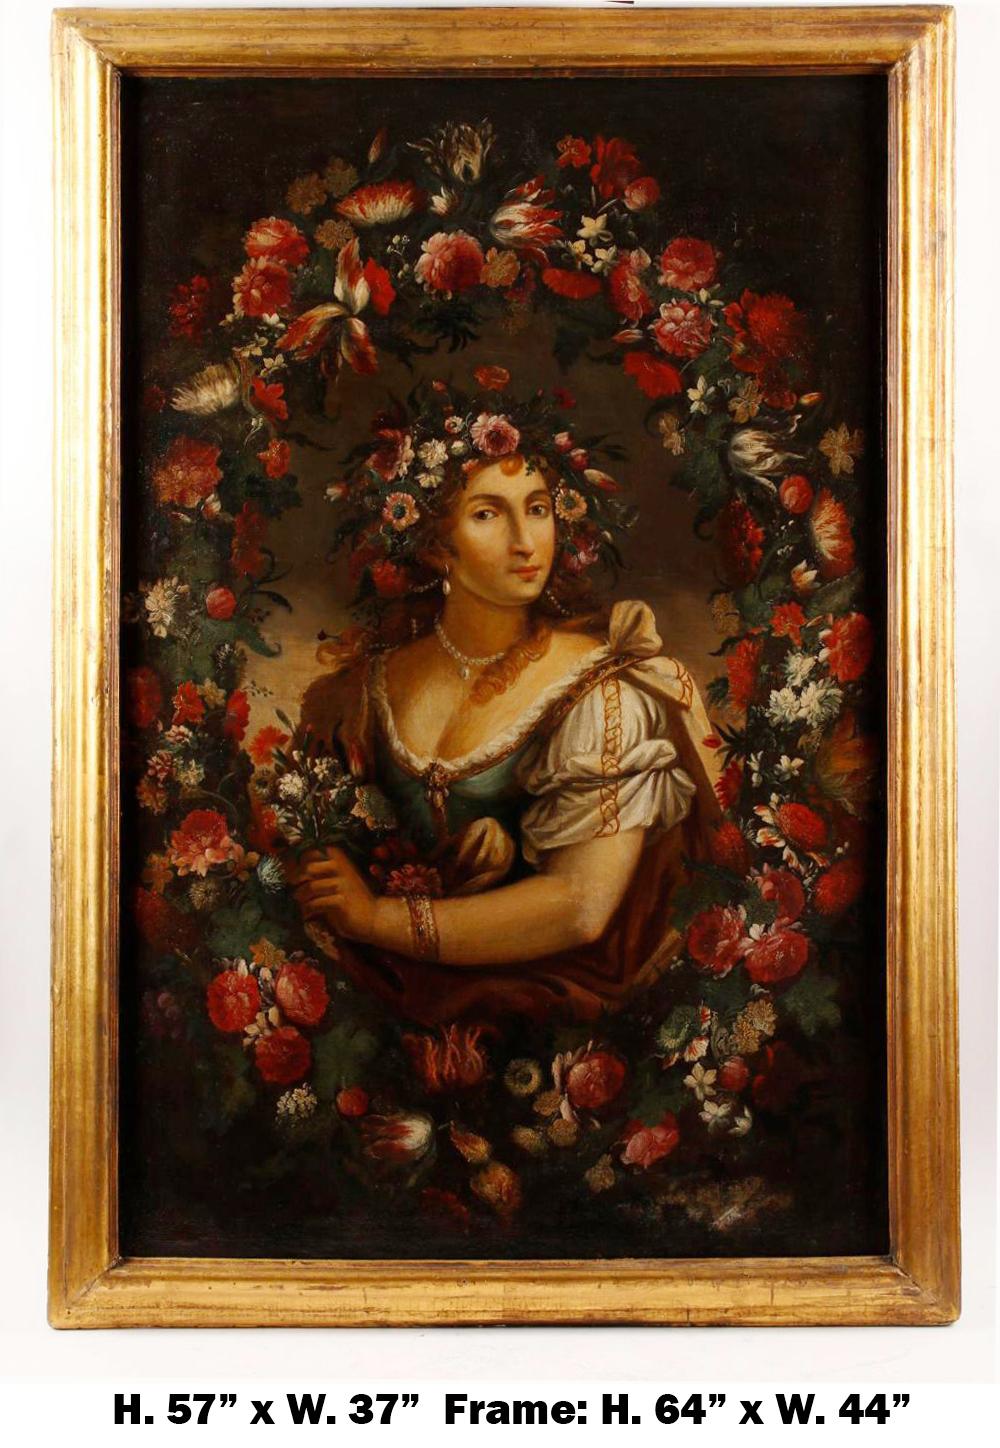 Fabulous large 19 century Spanish painting portrait of a flower girl. The canvas is laid on Masonite. 
Meticulous attention has been given to every detail.
Unsigned.

Measures: With frame: H. 64